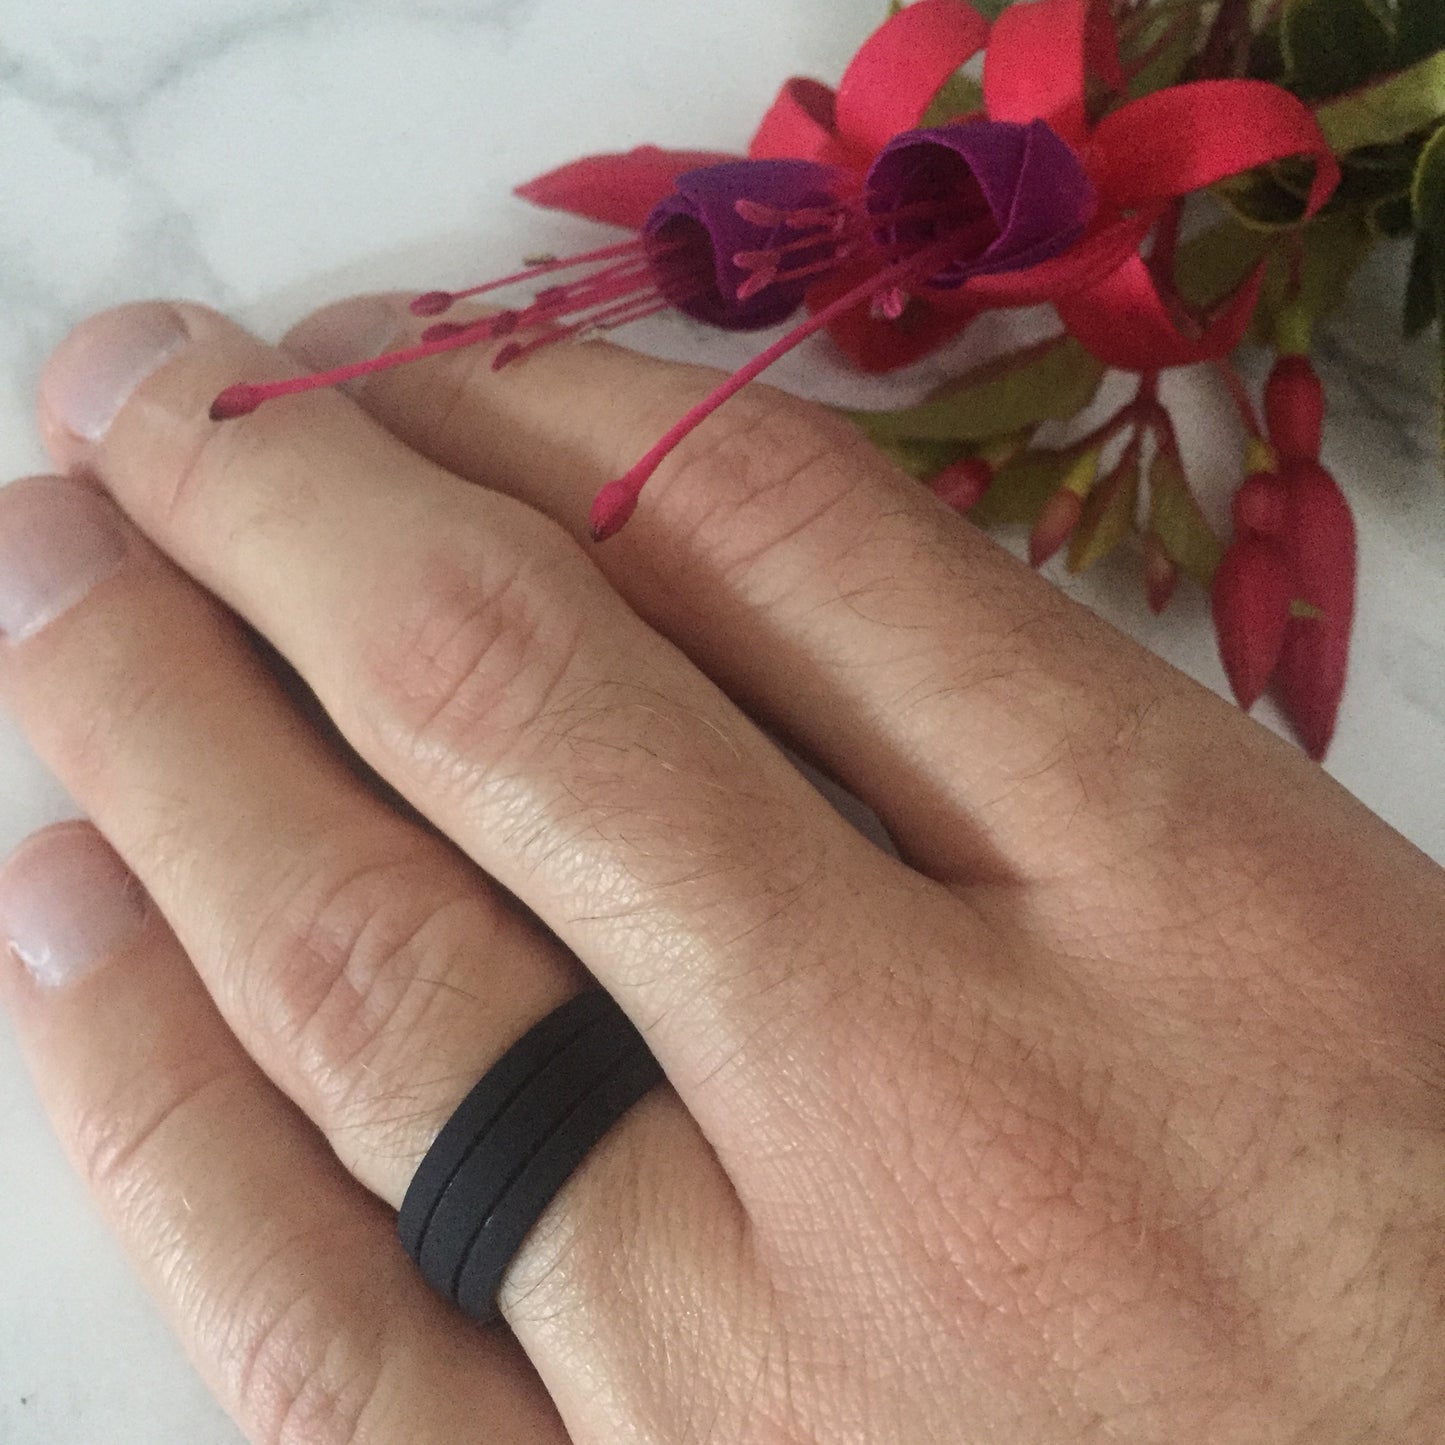 Black Double Indentation Unisex Wedding Bands, Silicone Rings for Women and Men - 8mm